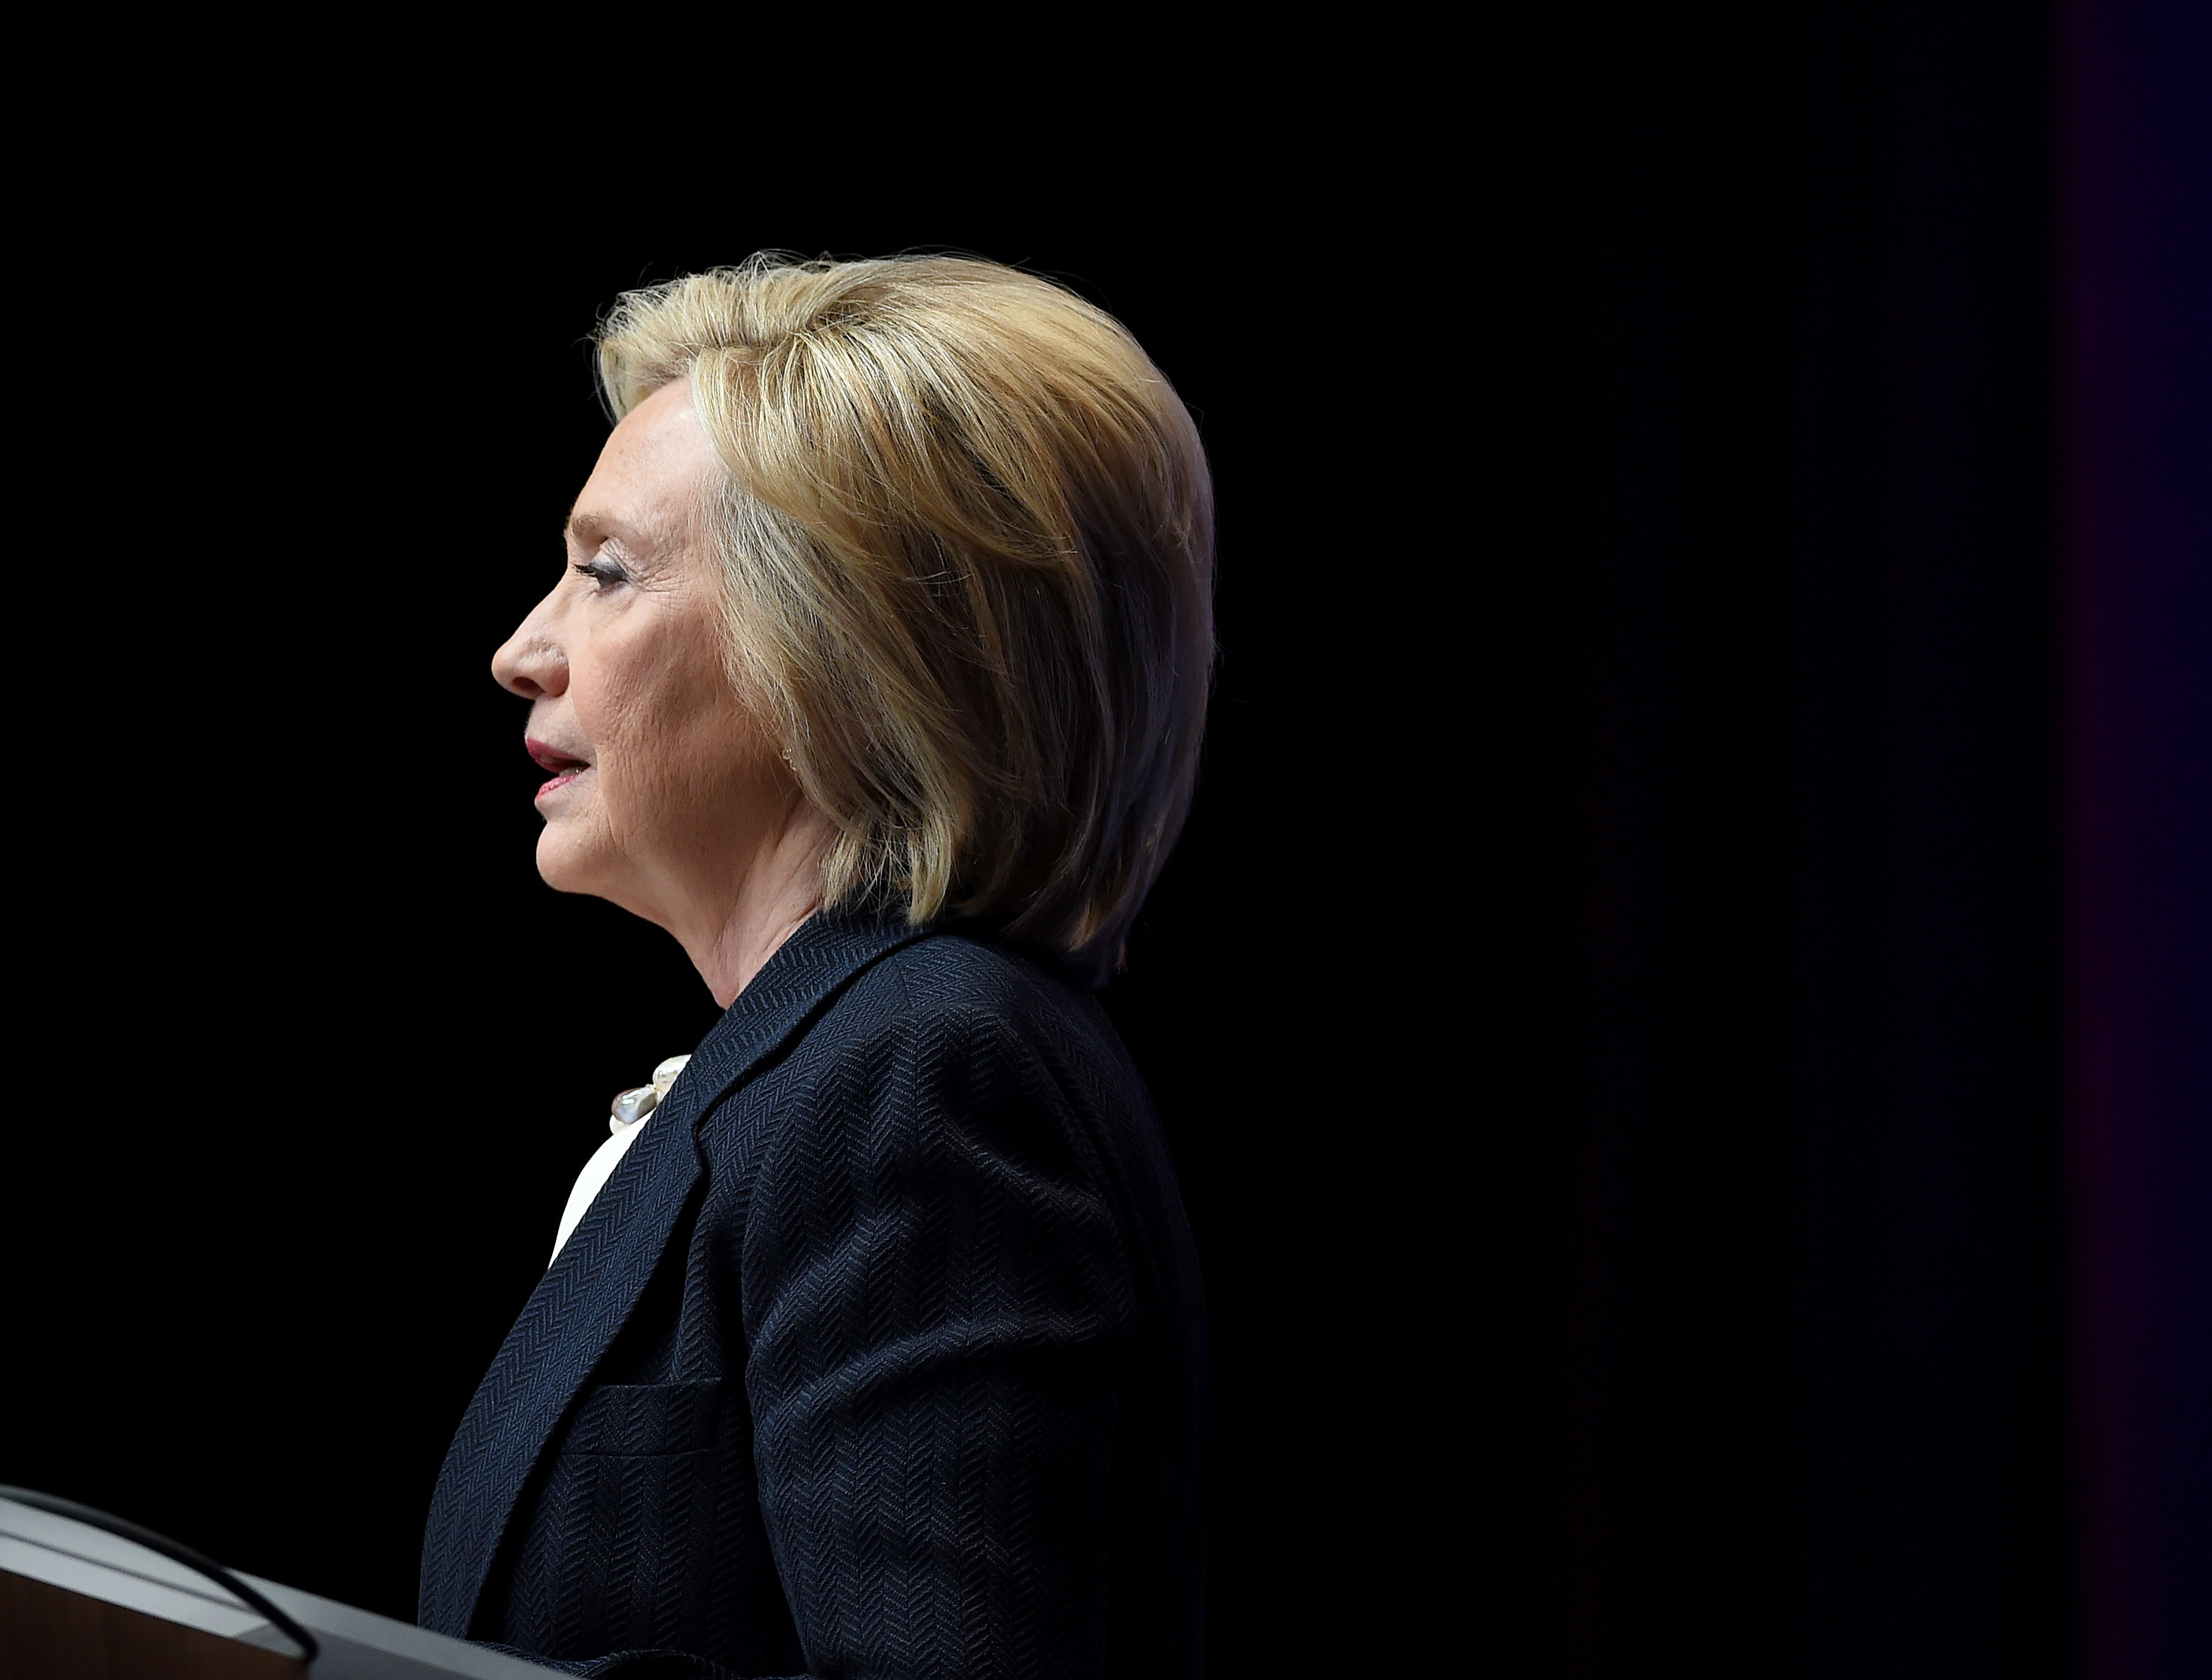 Democratic presidential candidate and former U.S. Secretary of State Hillary Clinton speaks at the National Association of Latino Elected and Appointed Officials' (NALEO) 32nd Annual Conference at the Aria Resort &amp; Casino at CityCenter on June 18, 2015 in Las Vegas, Nevada. (Ethan Miller&mdash;Getty Images)